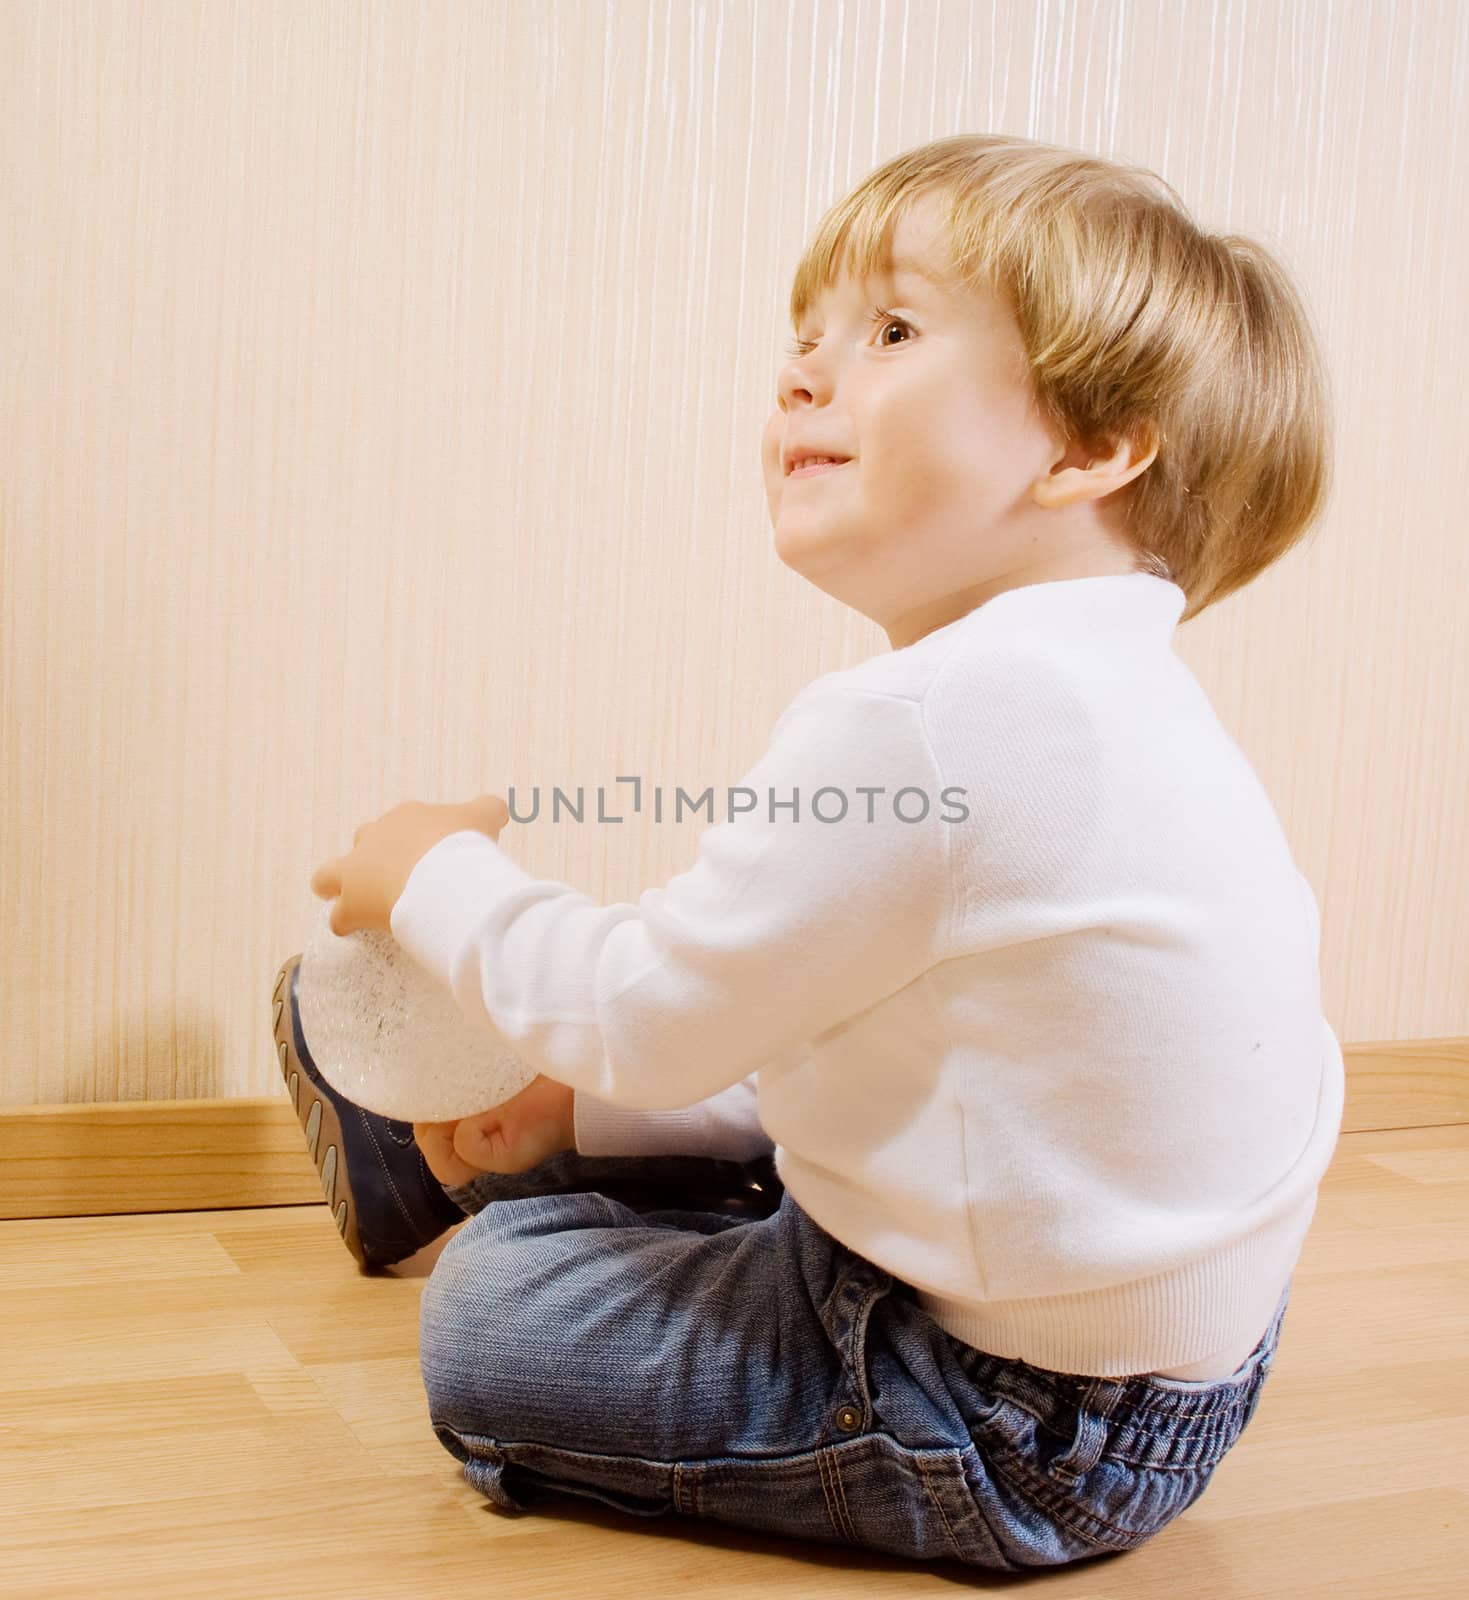 The child playing on the wood floor with white ball